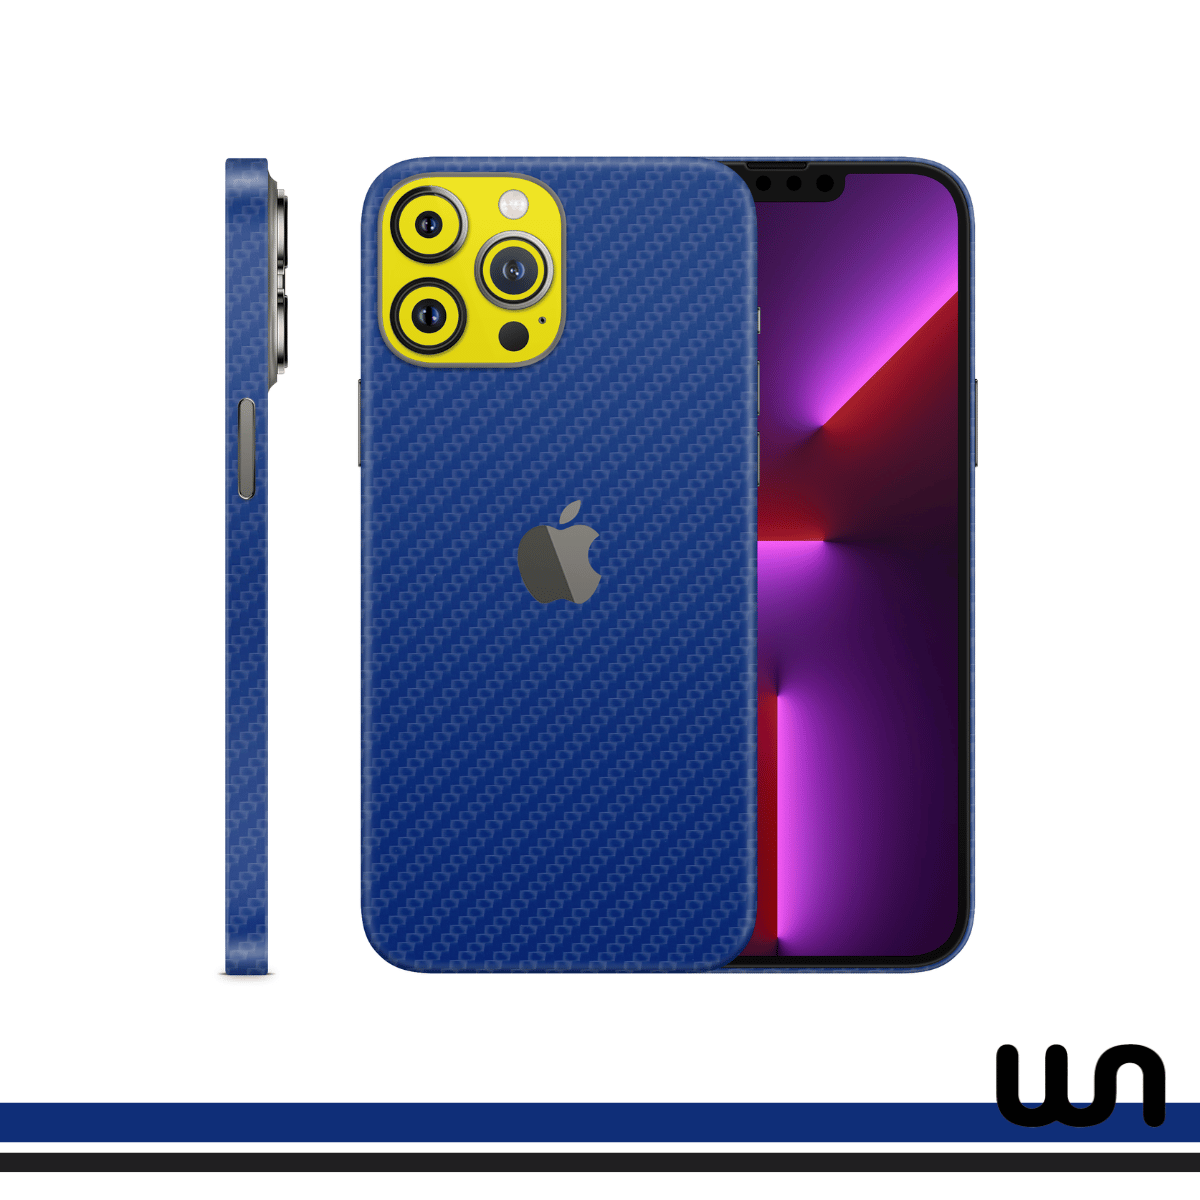 Blue CF with Dot Yellow - Duotone Skins For iPhone